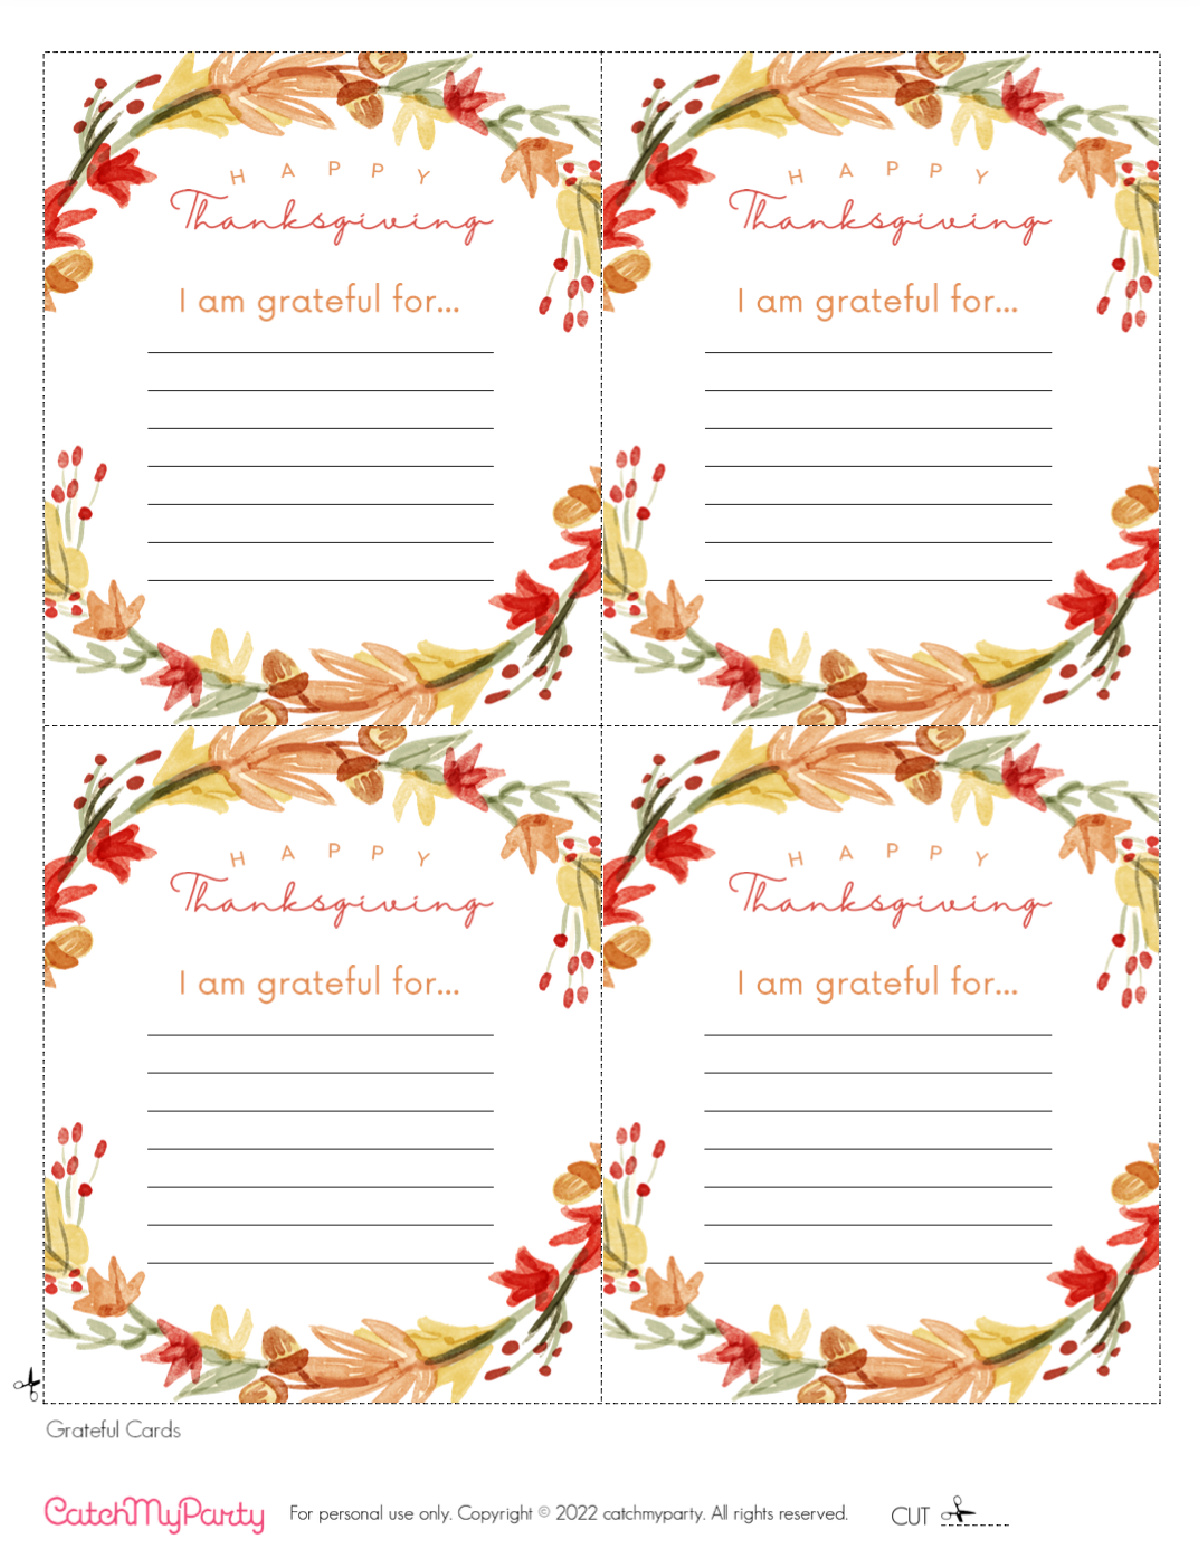 Download these FREE Thanksgiving Printables - "I am Grateful For..." Thanksgiving Cards